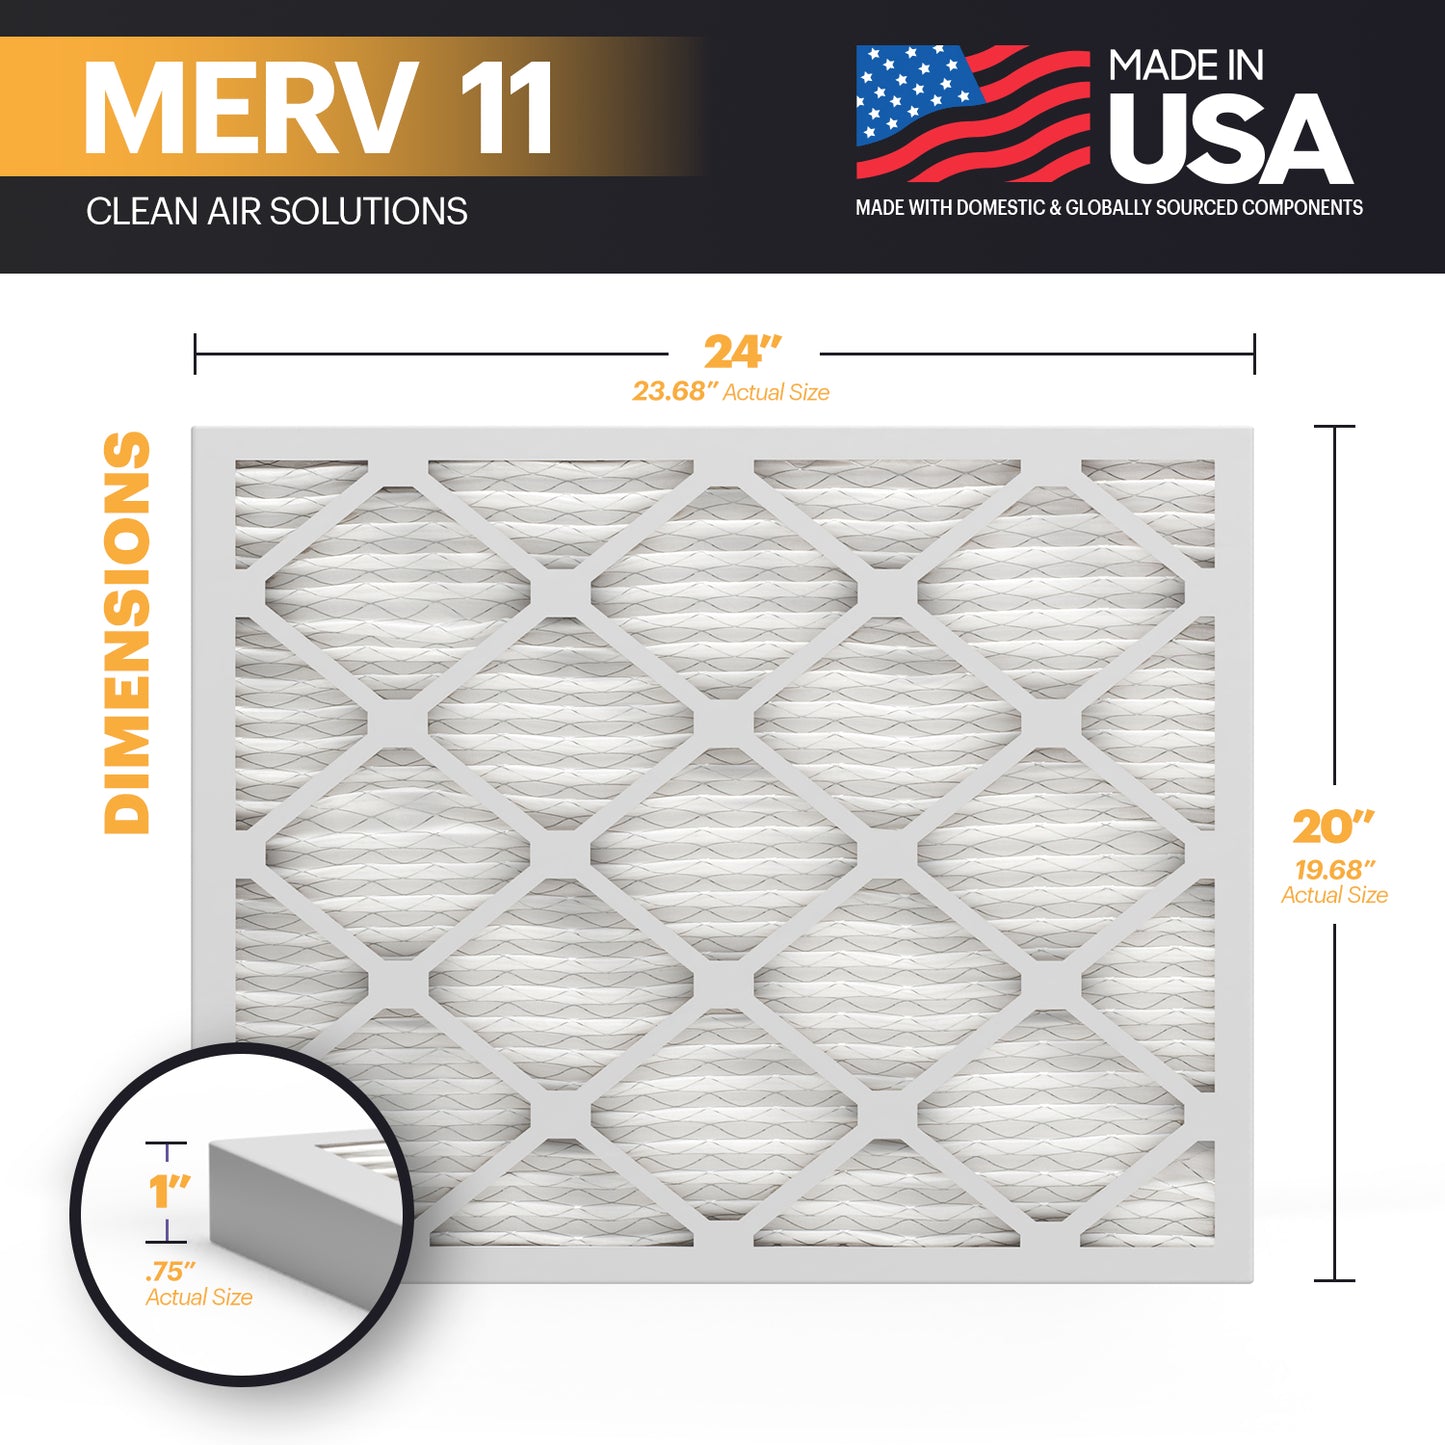 BNX TruFilter 20x24x1 Air Filter MERV 11 (6-Pack) - MADE IN USA - Allergen Defense Electrostatic Pleated Air Conditioner HVAC AC Furnace Filters for Allergies, Dust, Pet, Smoke, Allergy MPR 1200 FPR 7